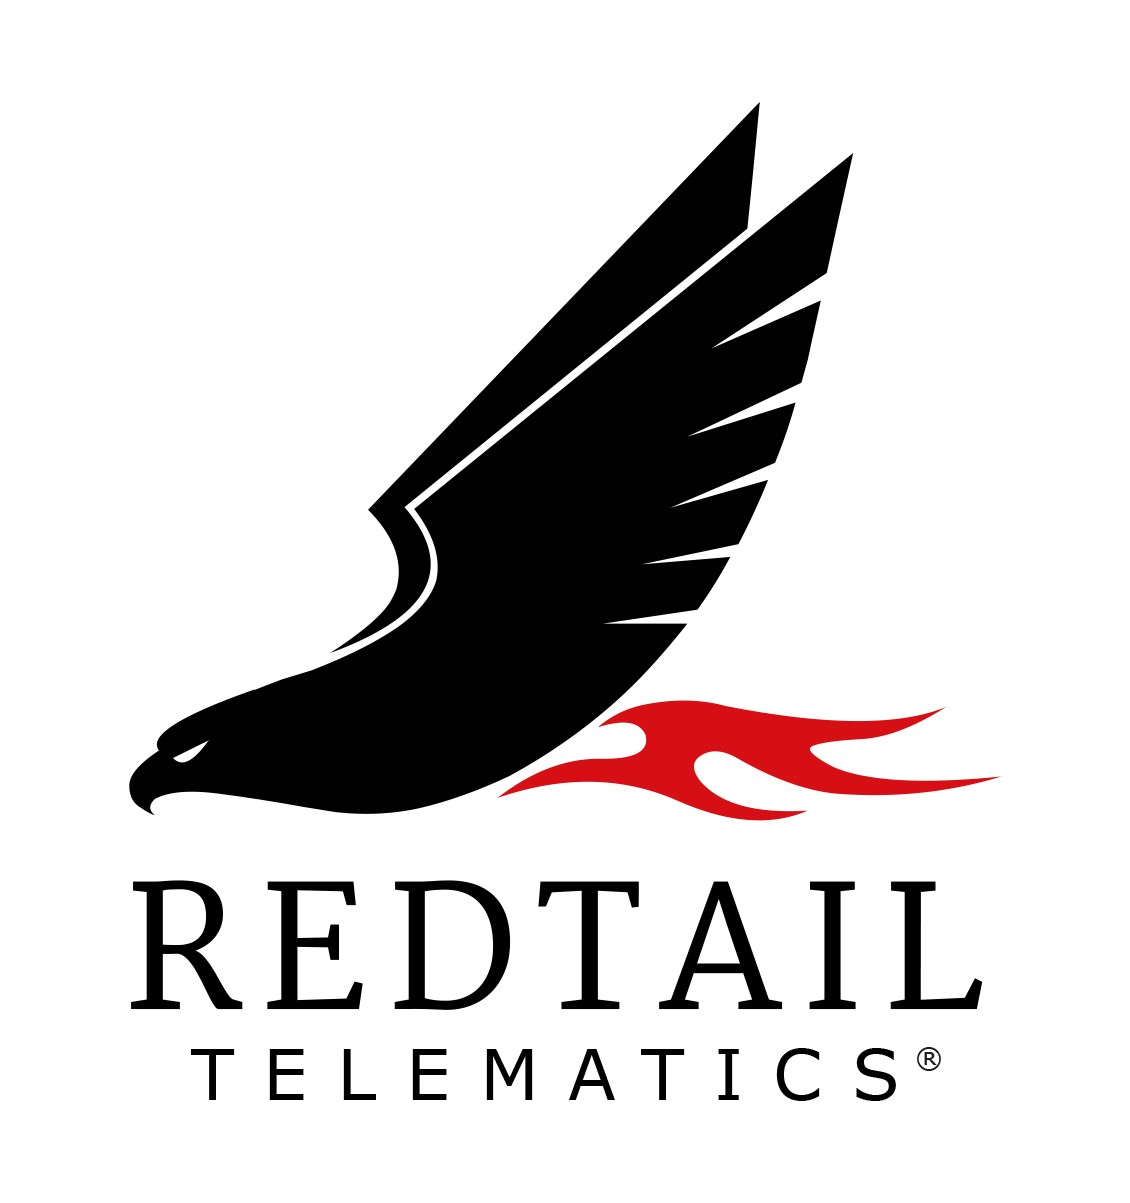 Redtail Telematics to Launch Advanced Driver Scoring App to Automotive